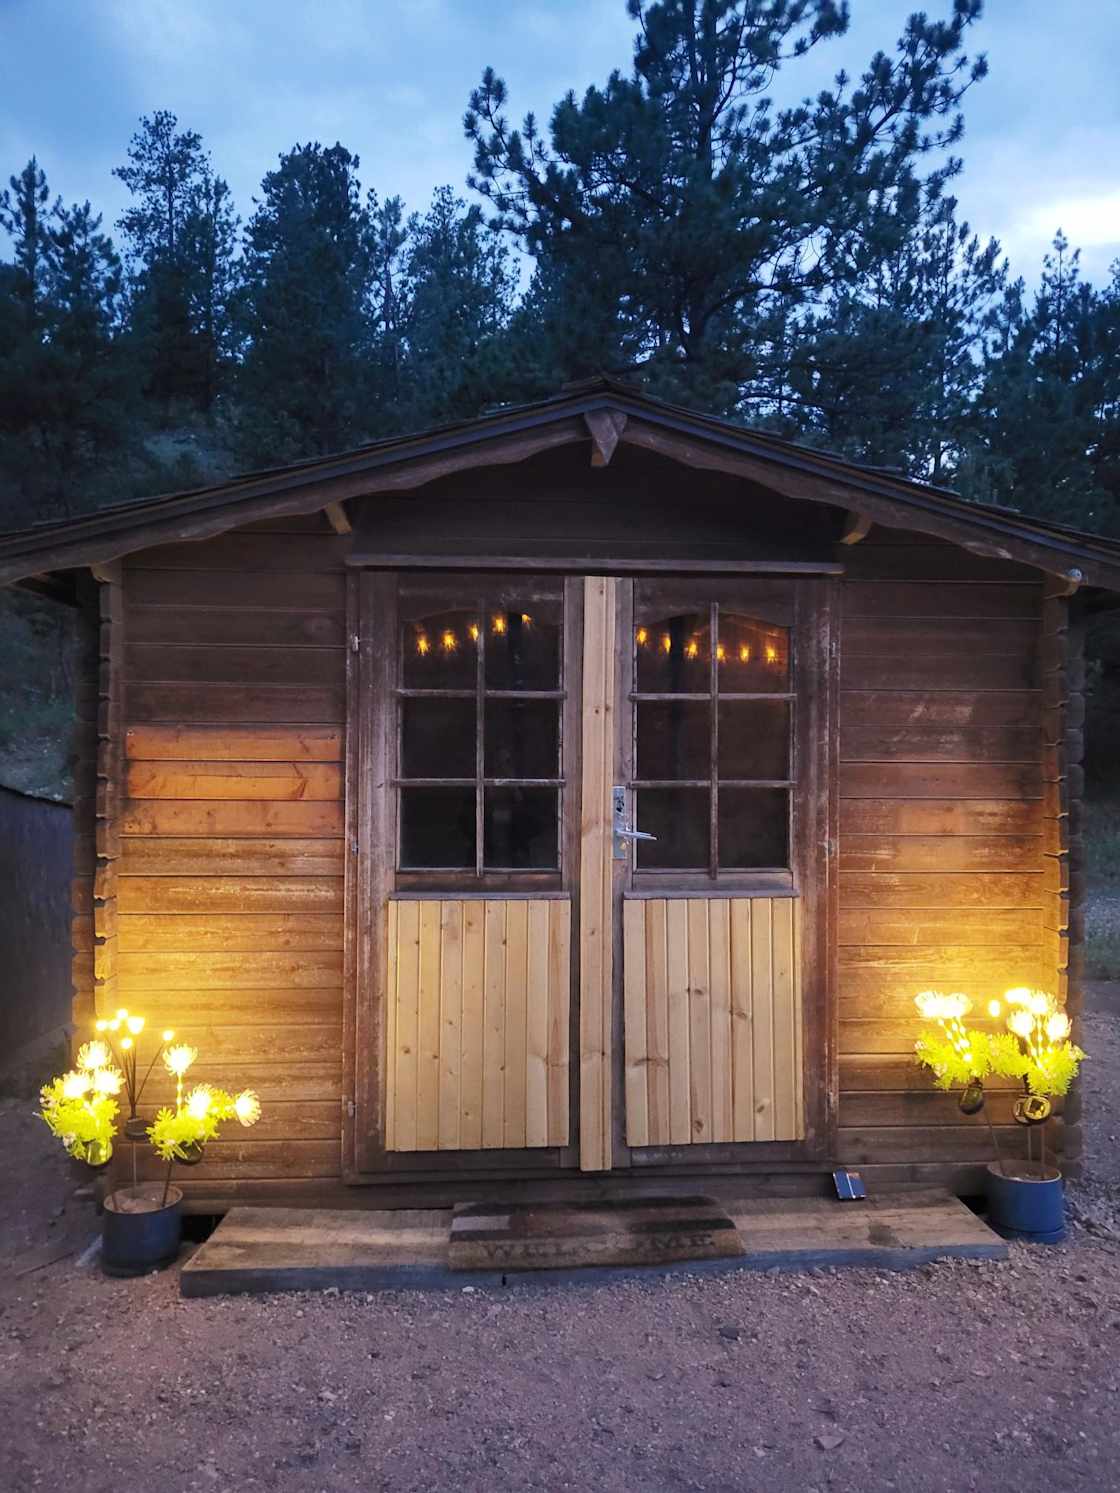 Rustic Cabin. Sleeps 1-2. Includes full bed with bedding.